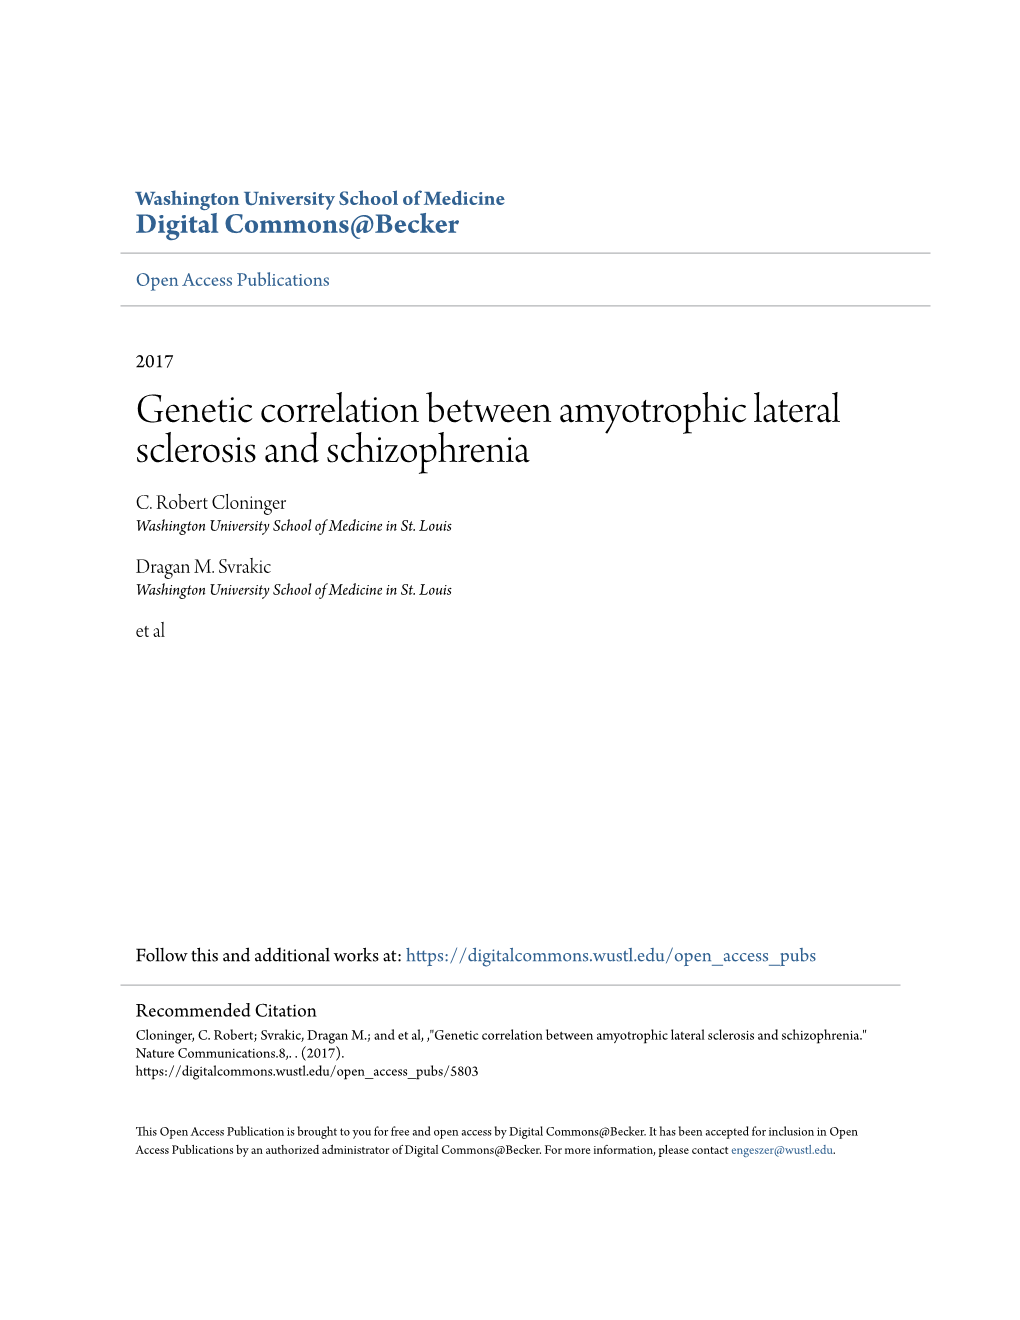 Genetic Correlation Between Amyotrophic Lateral Sclerosis and Schizophrenia C